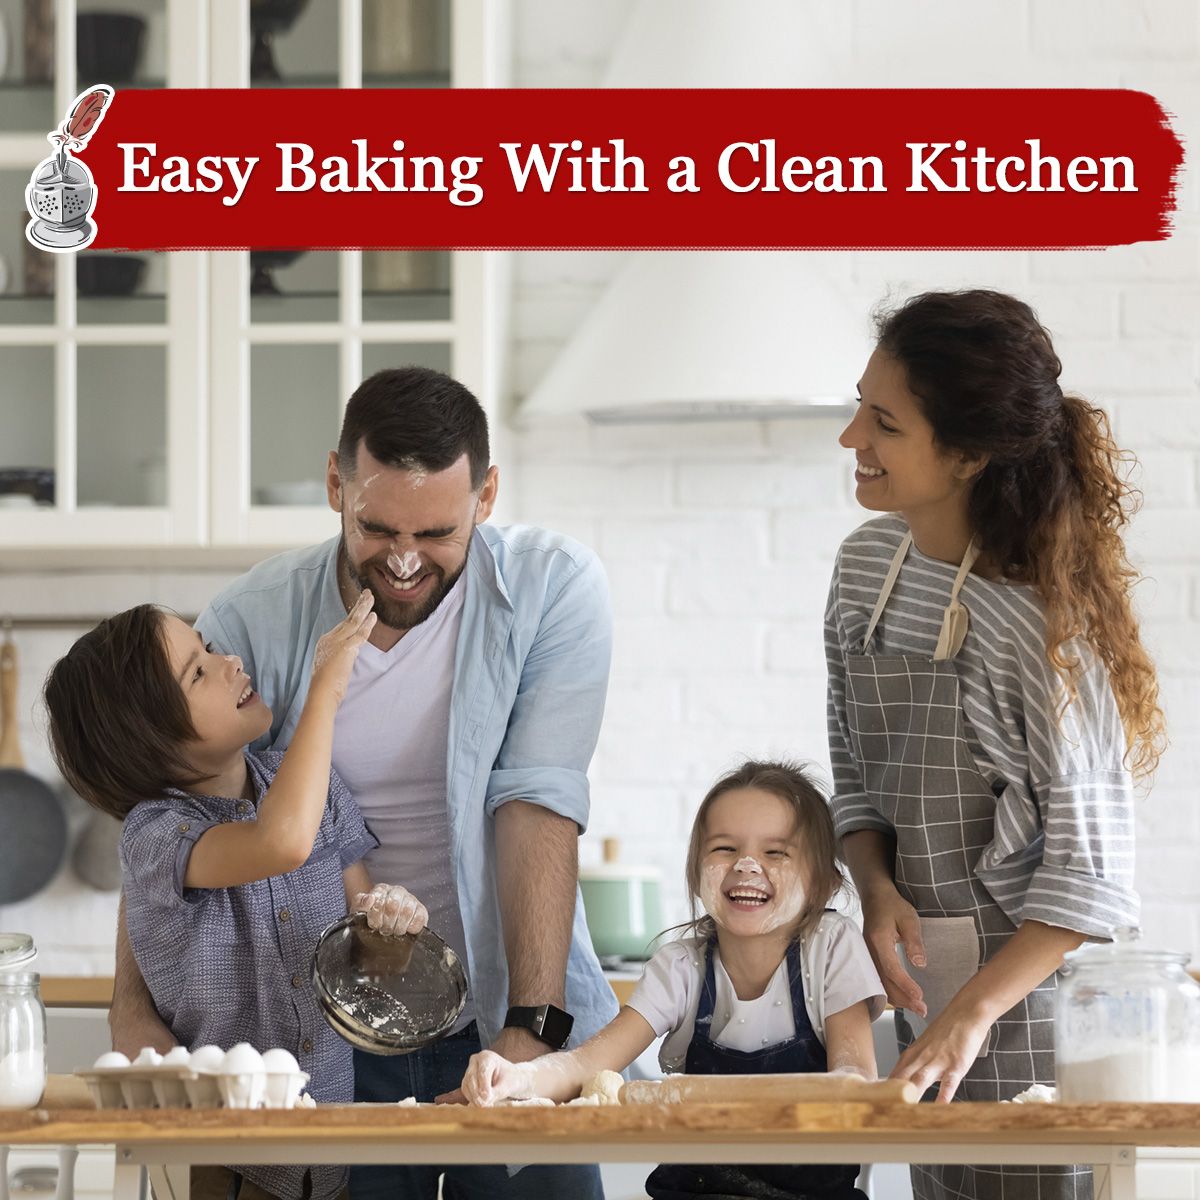 Easy Baking With a Clean Kitchen